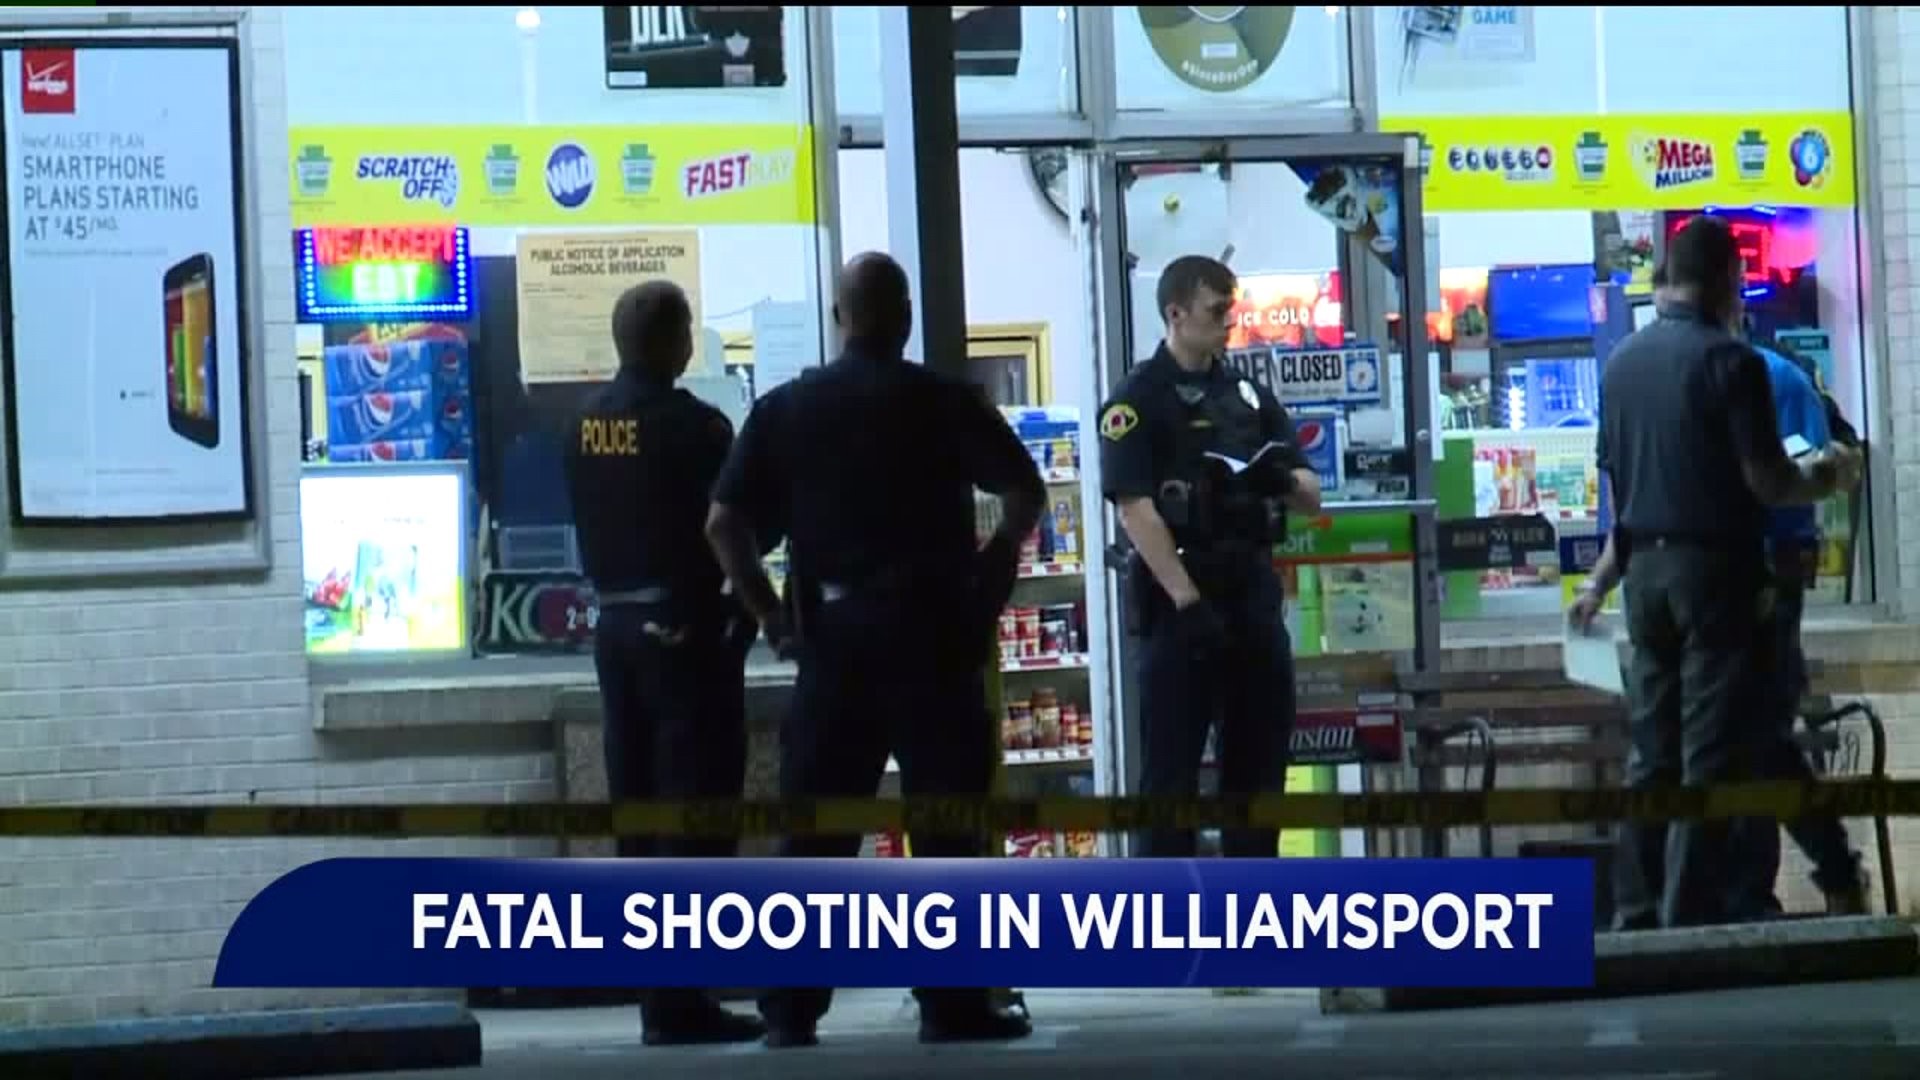 Police: One Dead, Another Hurt After Shooting at Mini-Mart in Williamsport